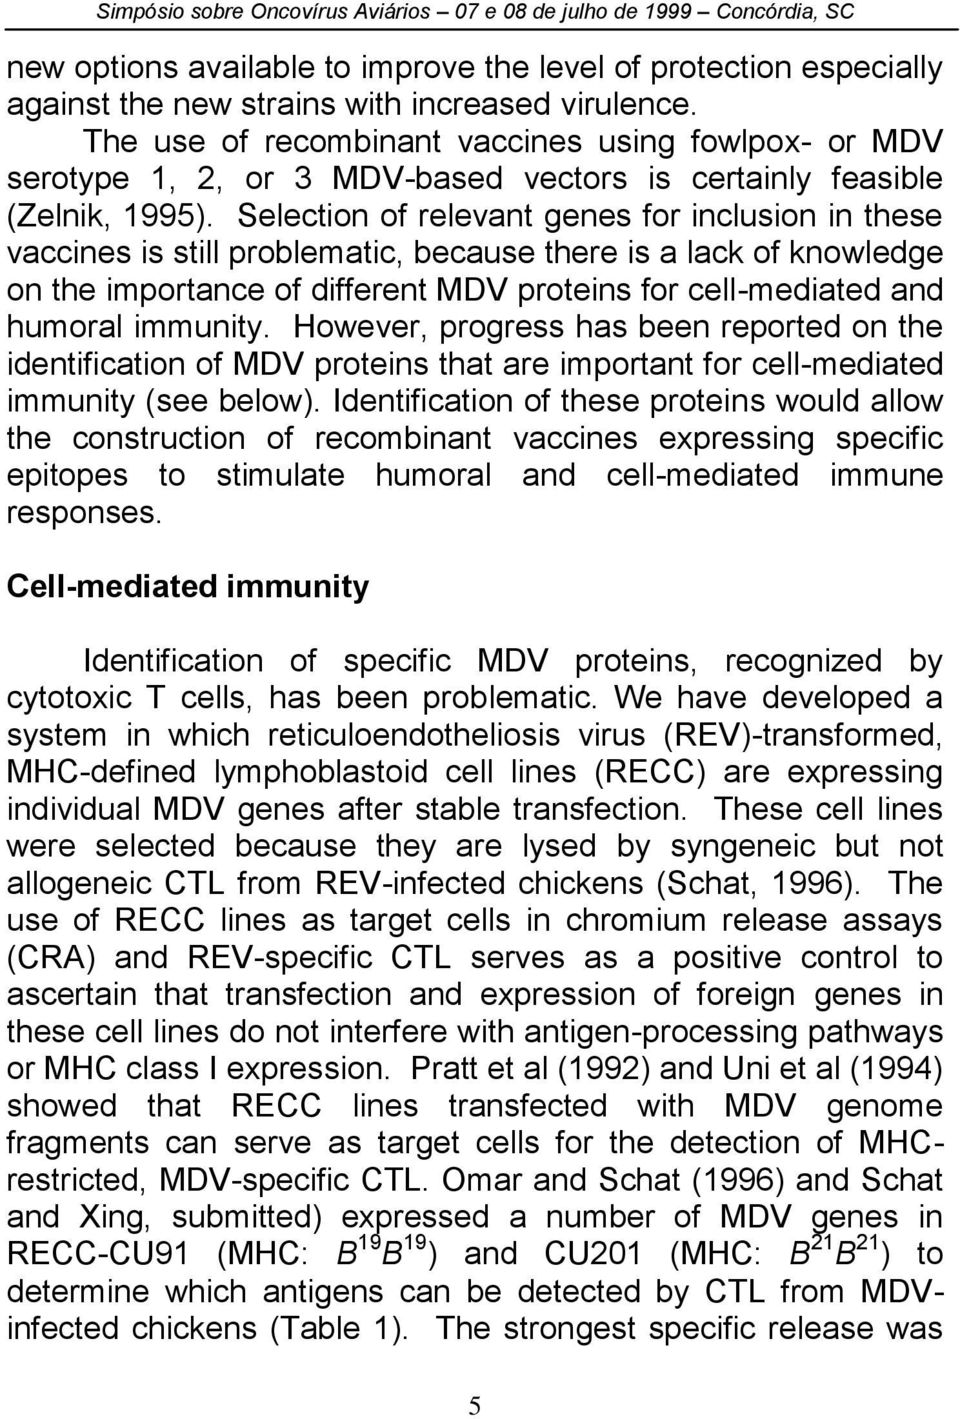 Selection of relevant genes for inclusion in these vaccines is still problematic, because there is a lack of knowledge on the importance of different MDV proteins for cell-mediated and humoral